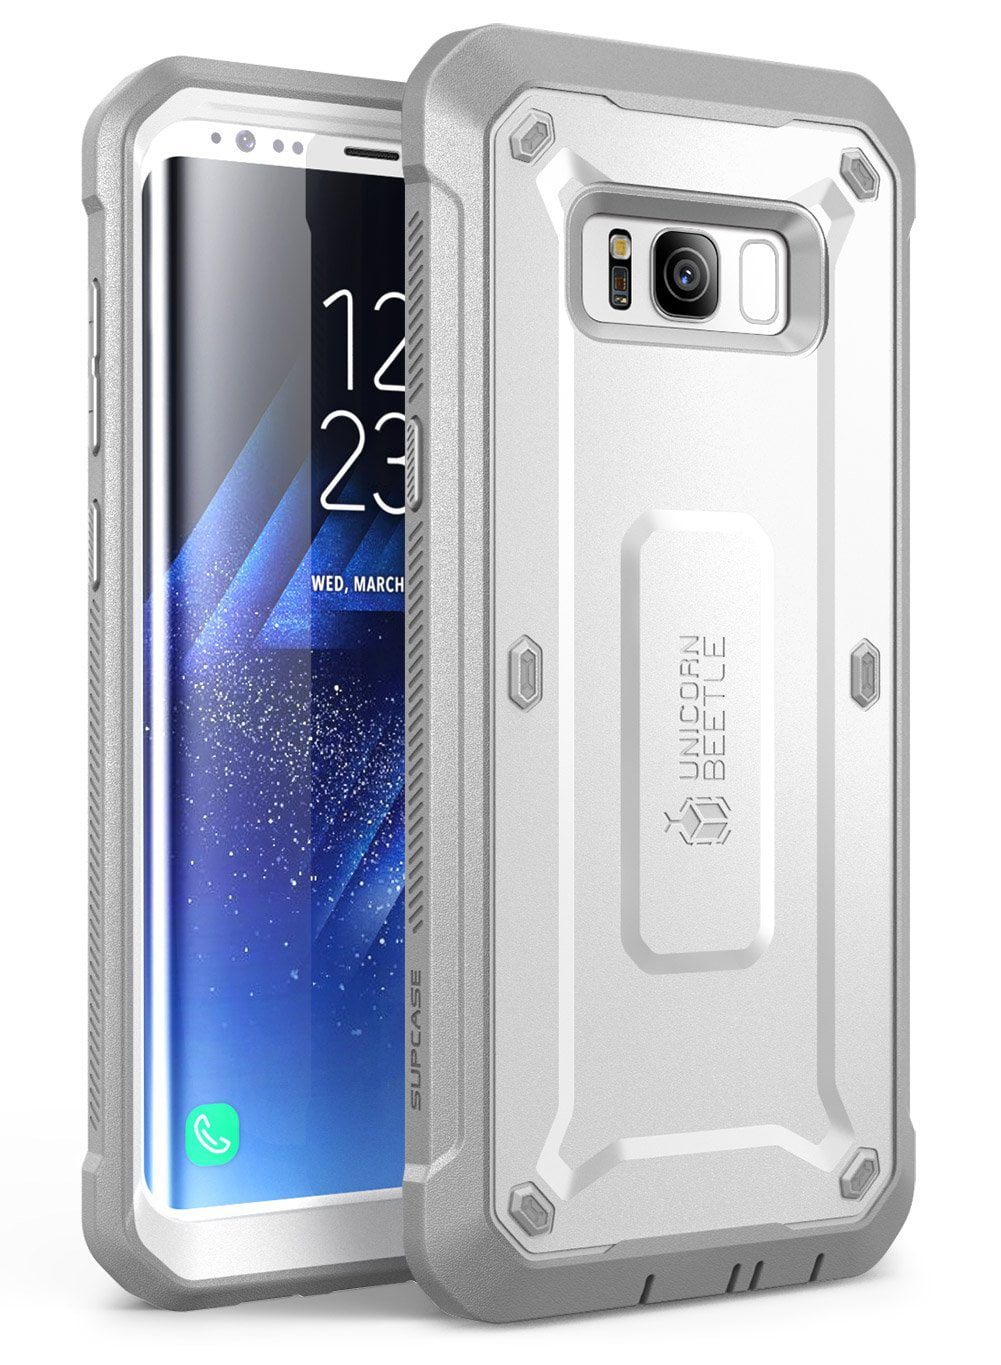 SUPCASE Full-body Rugged Holster Case with Built-in Samsung Galaxy S8 Case 